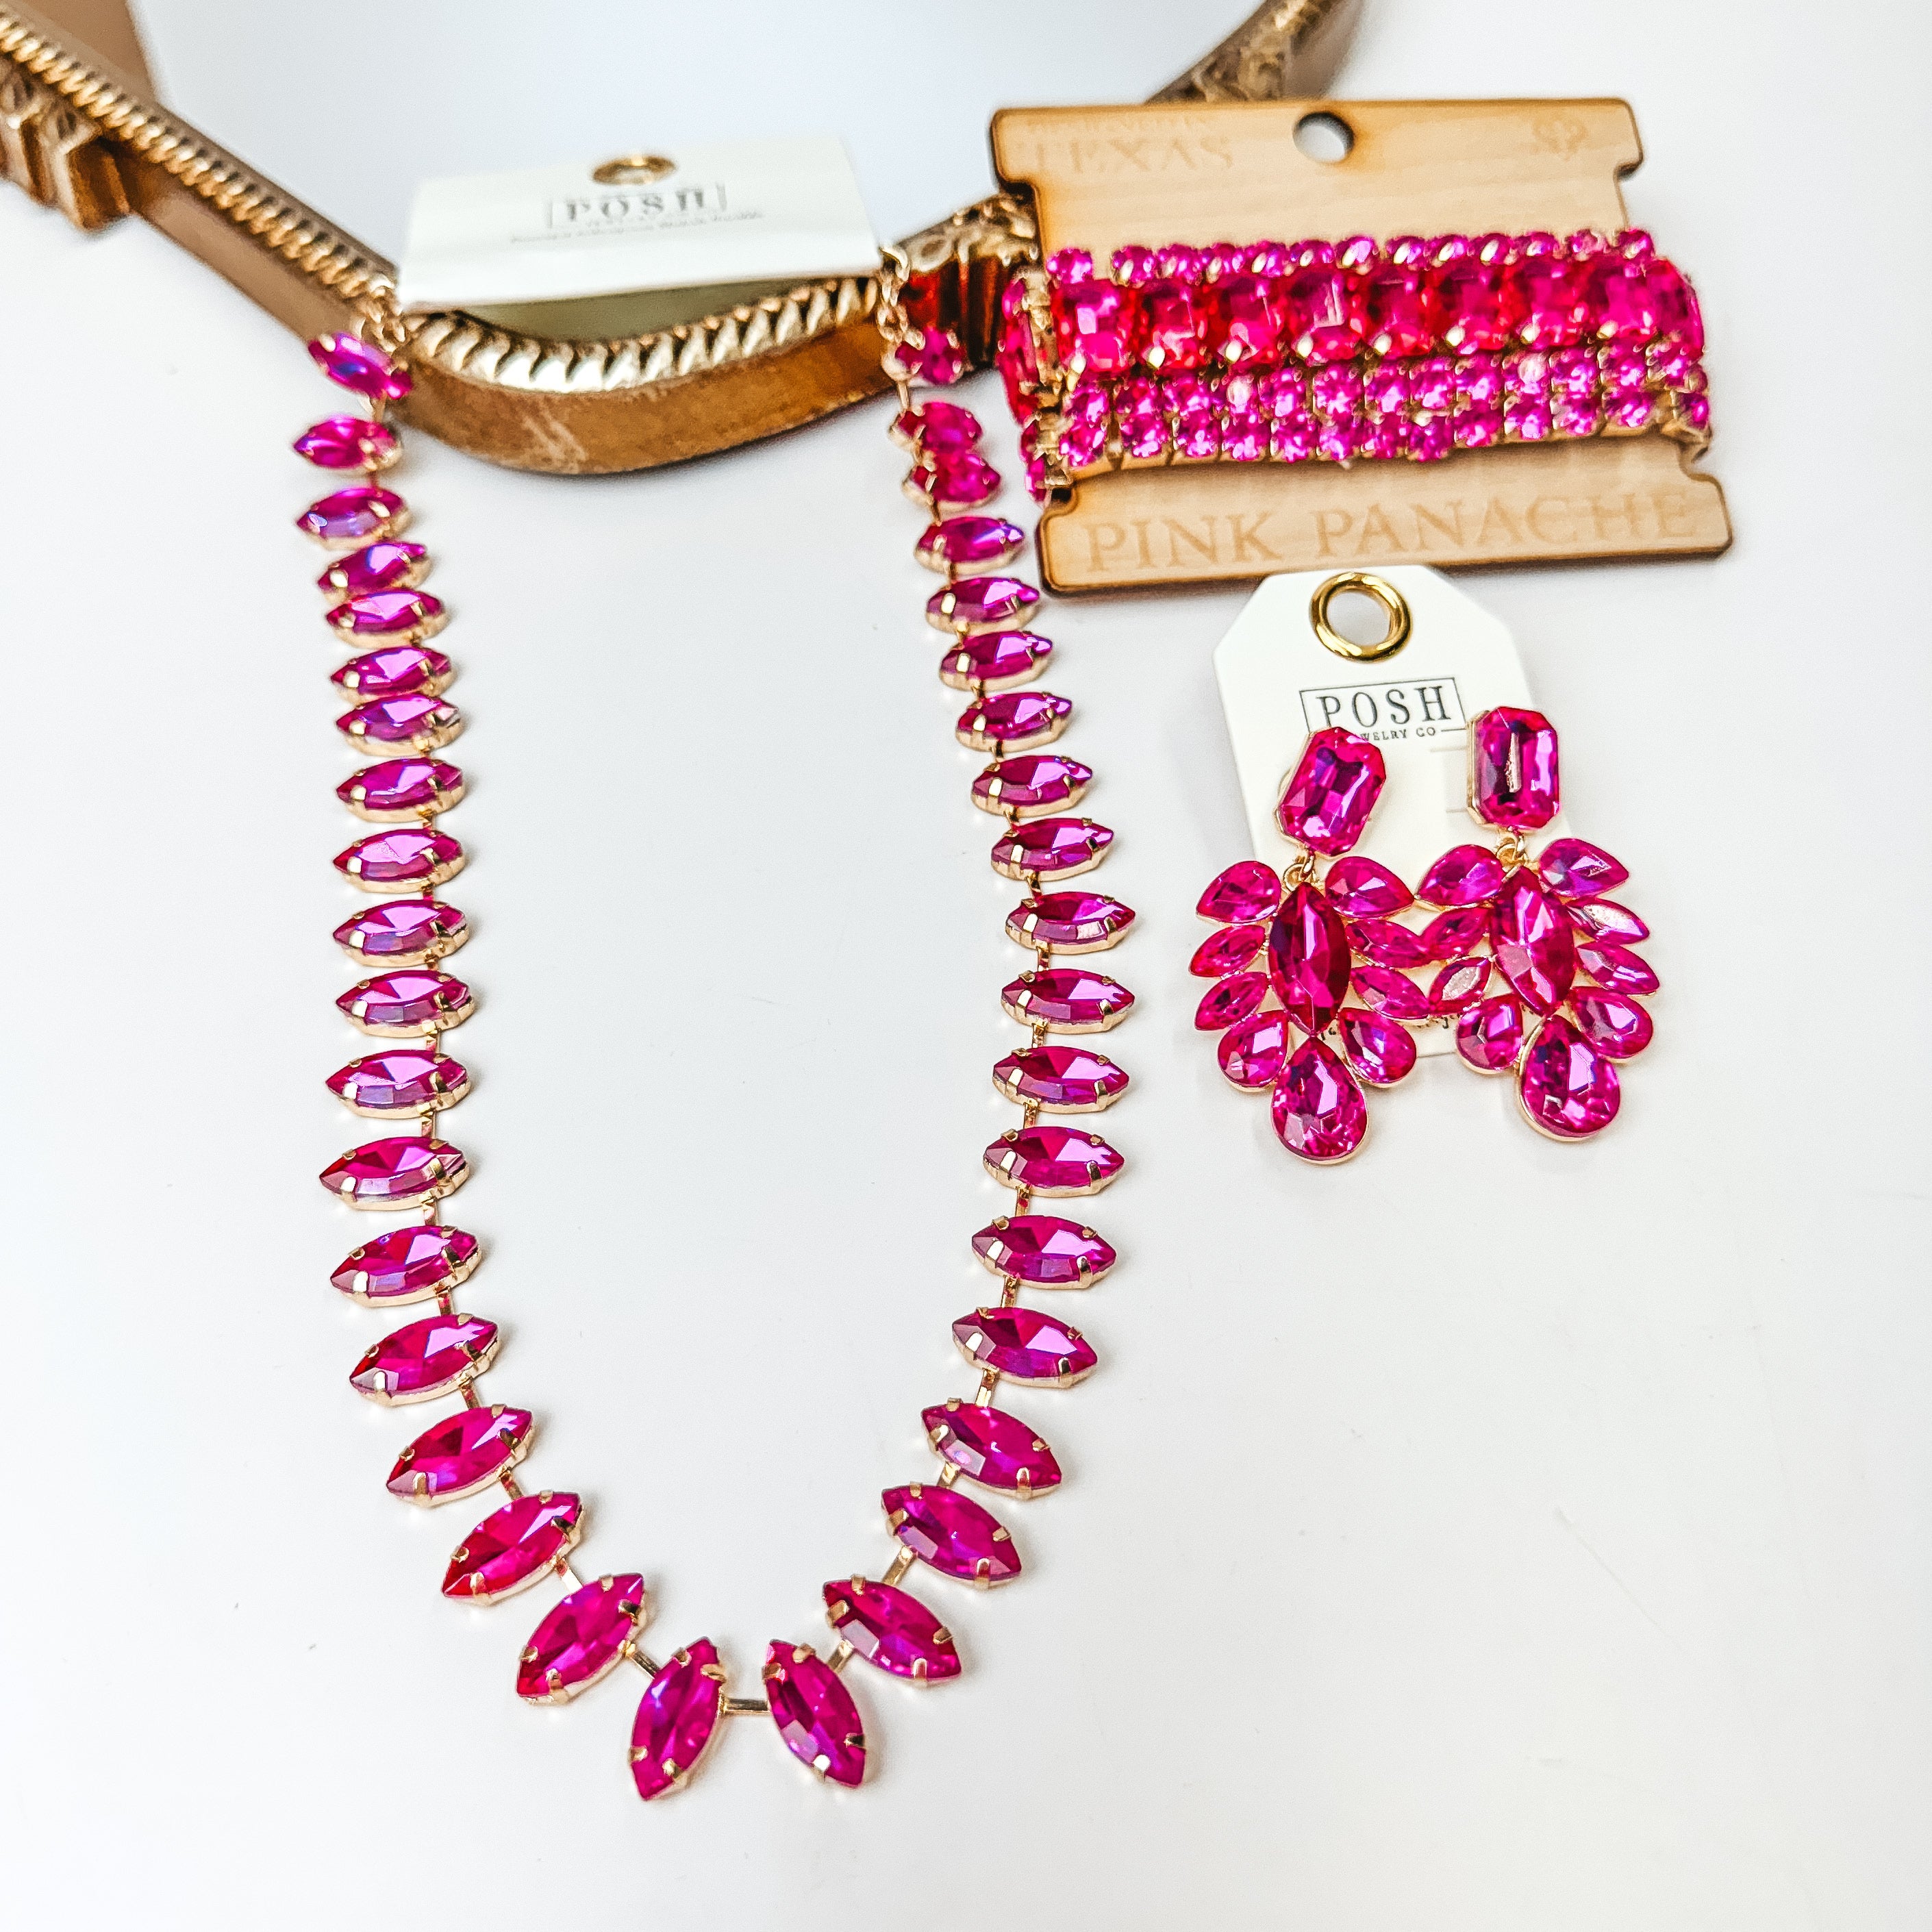 Pink Panache | Marquis Rhinestone Necklace in Fuchsia Pink - Giddy Up Glamour Boutique